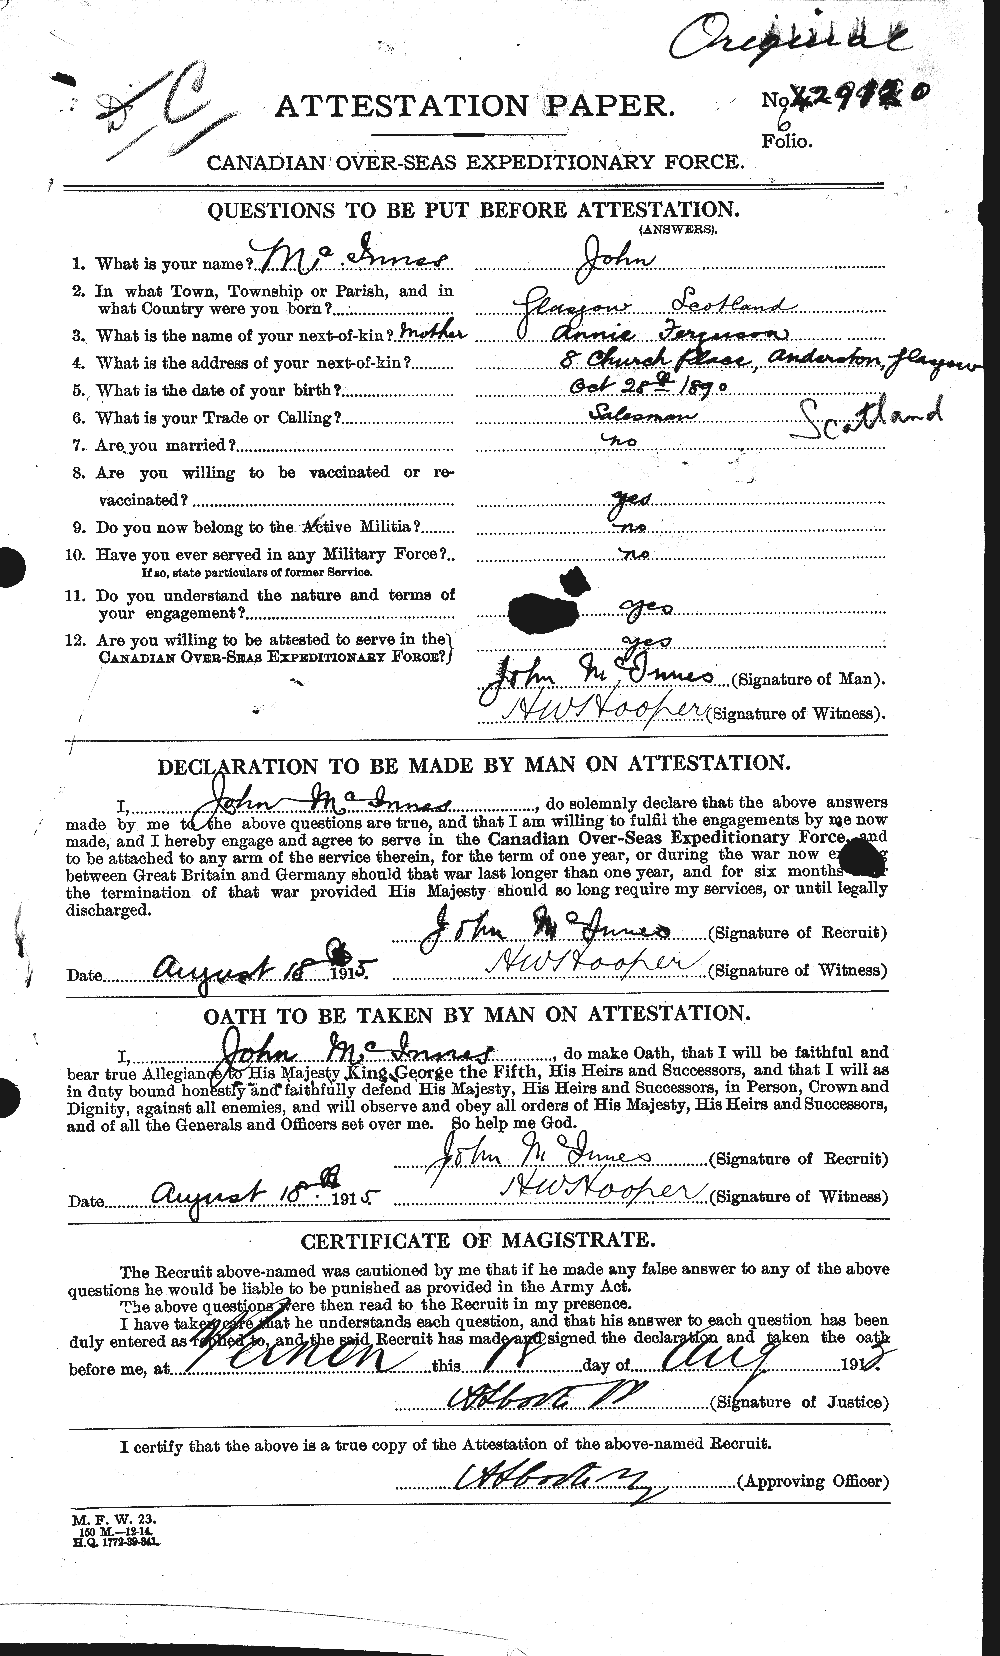 Personnel Records of the First World War - CEF 526682a